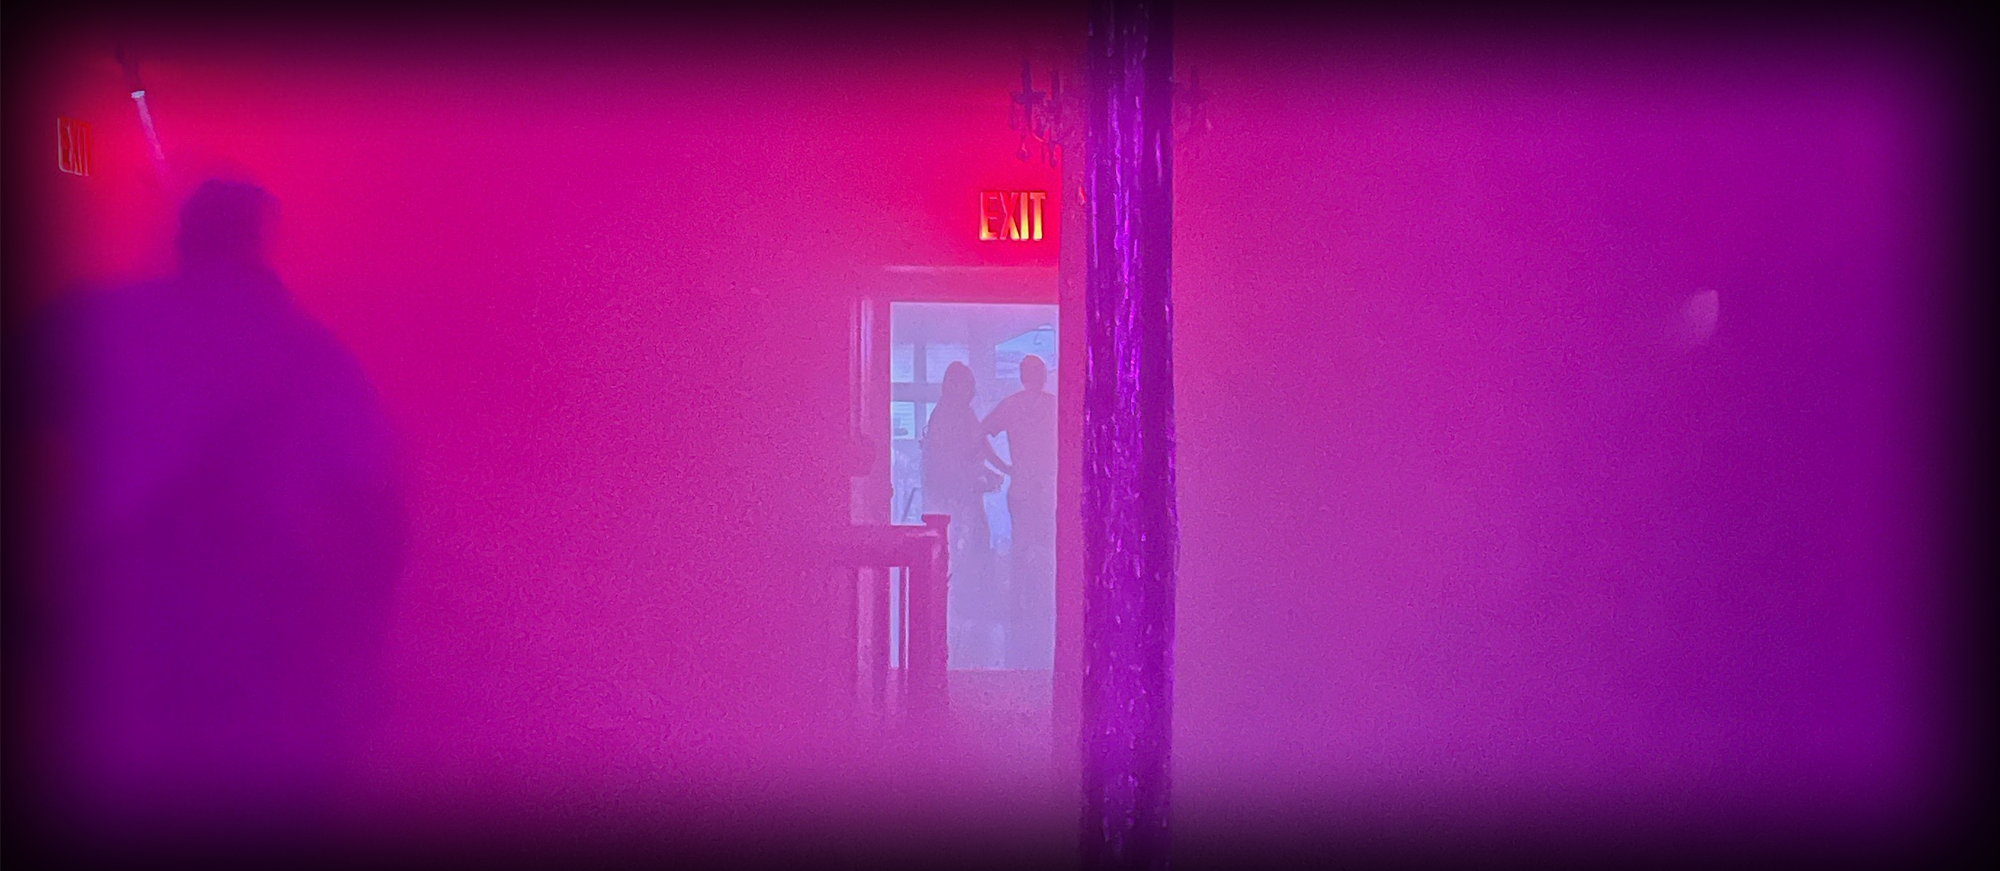 A pink-hued photo of a rave.